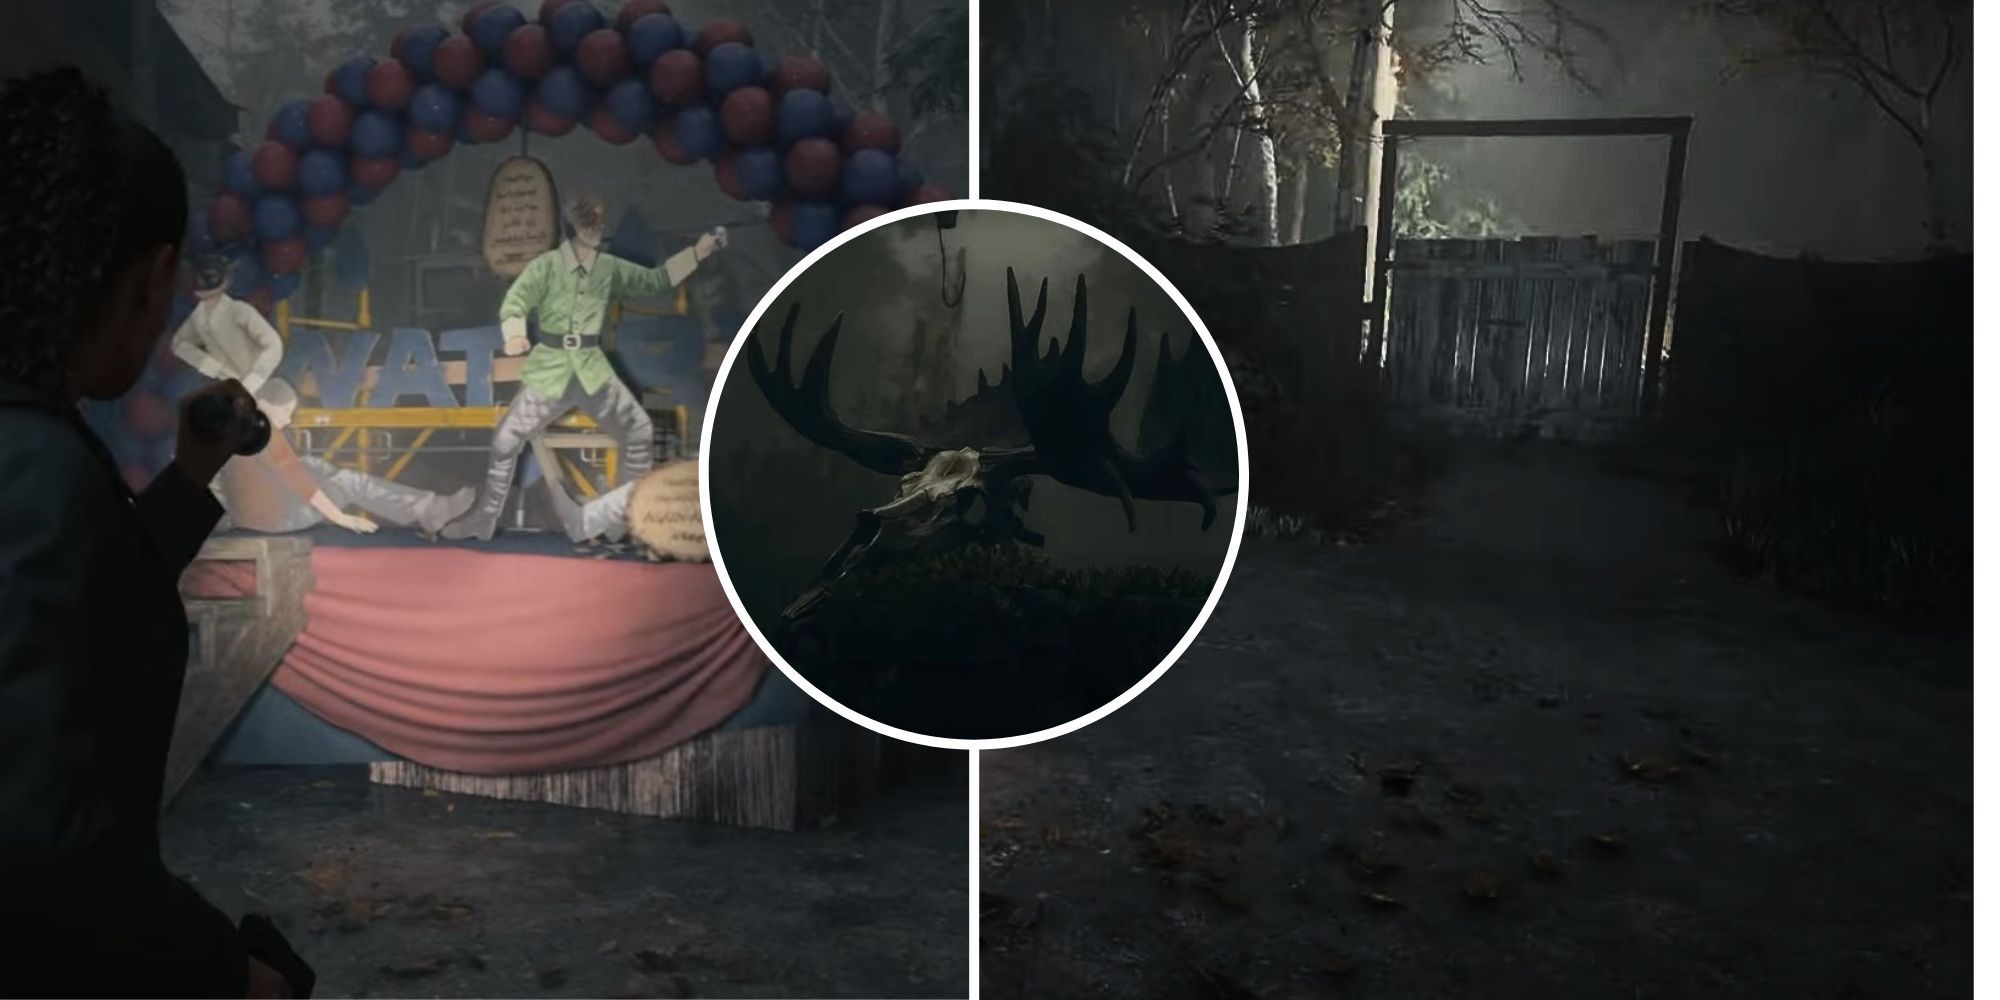 The Alan Wake 2 character found the Moose Mask for the parade float.